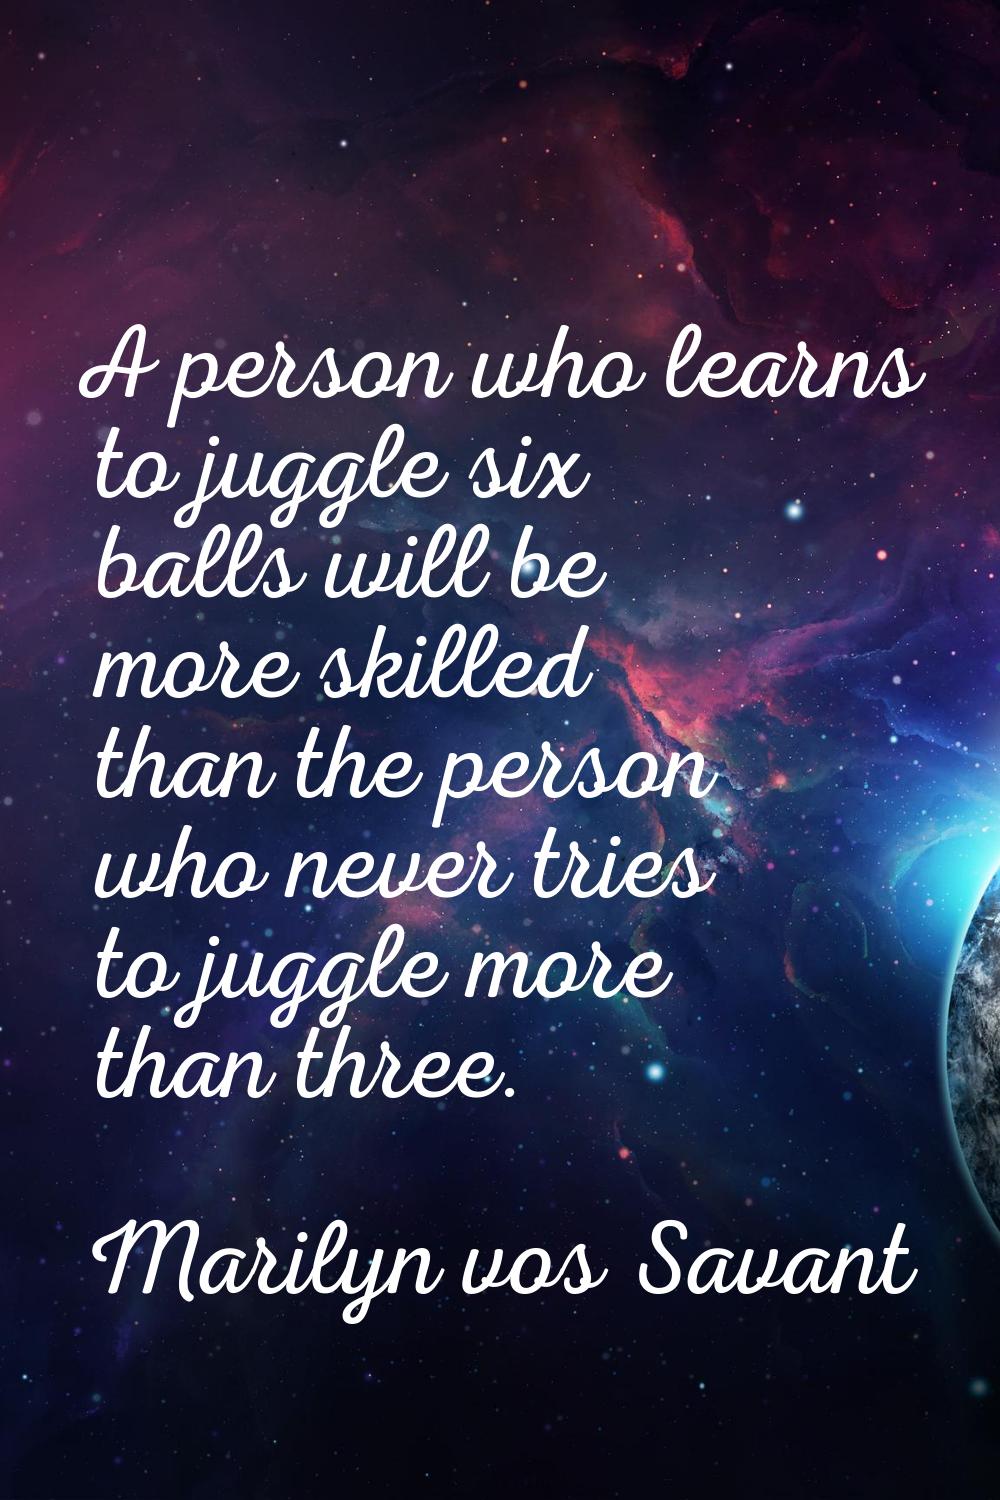 A person who learns to juggle six balls will be more skilled than the person who never tries to jug